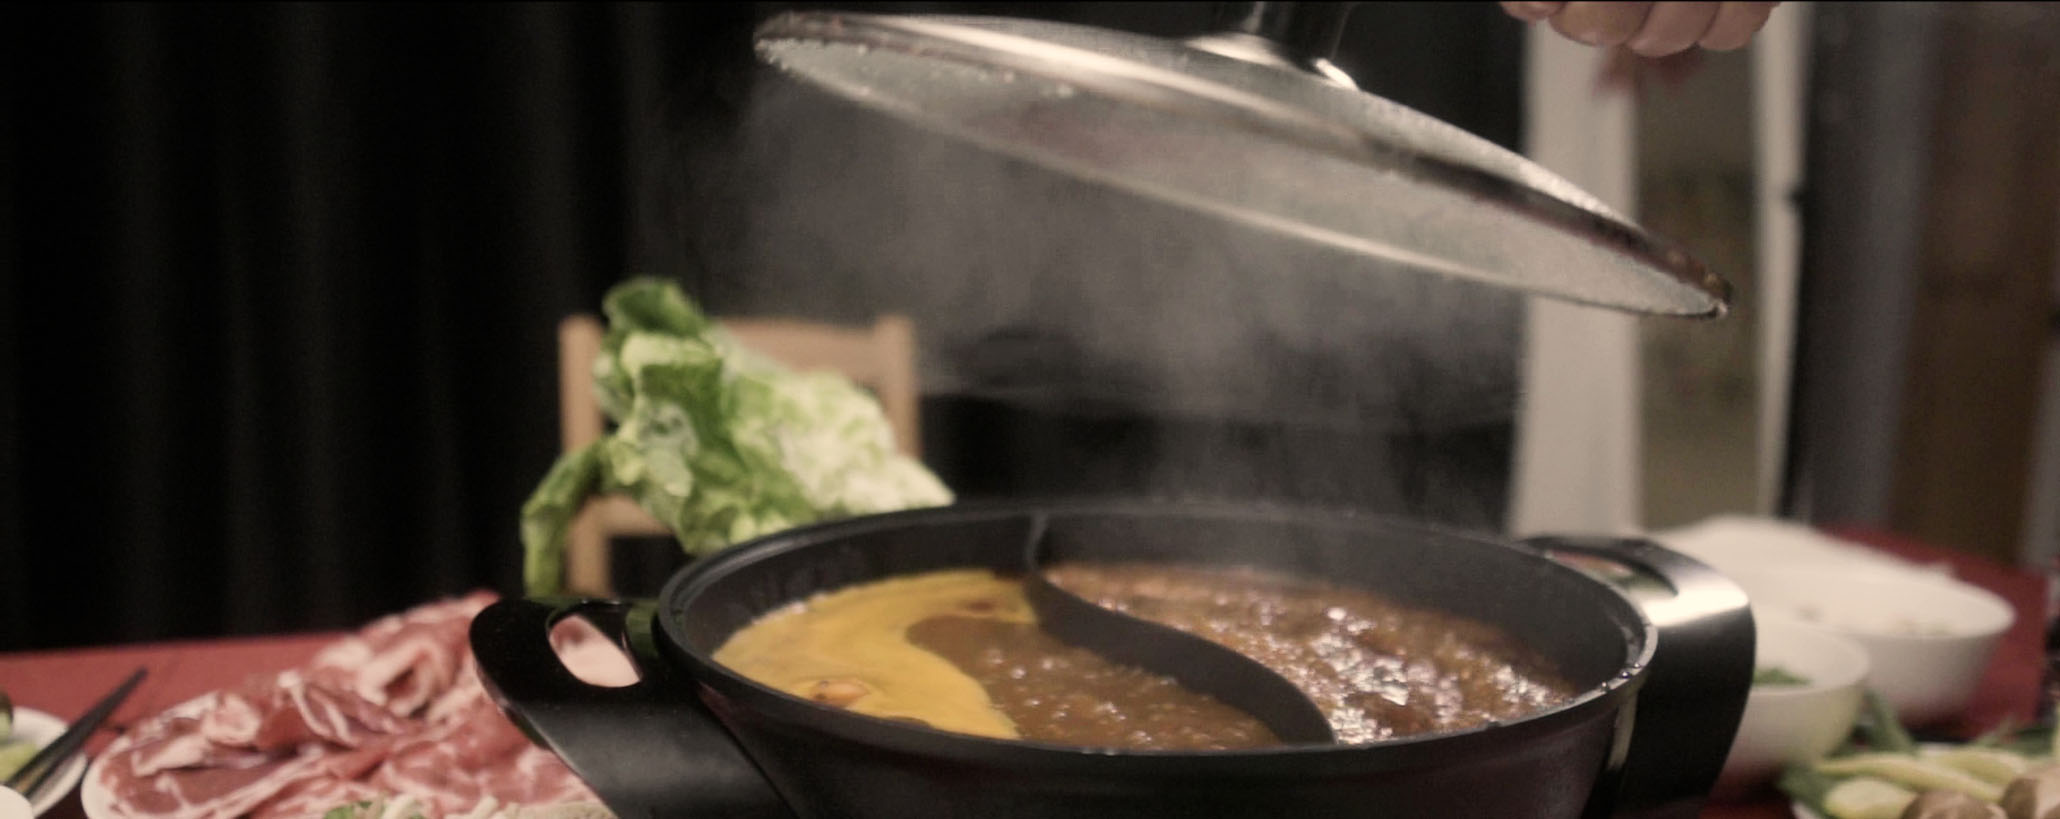 Still from Yoko Chen's short essay film shows the lid being pulled off a steaming hot pot full of food